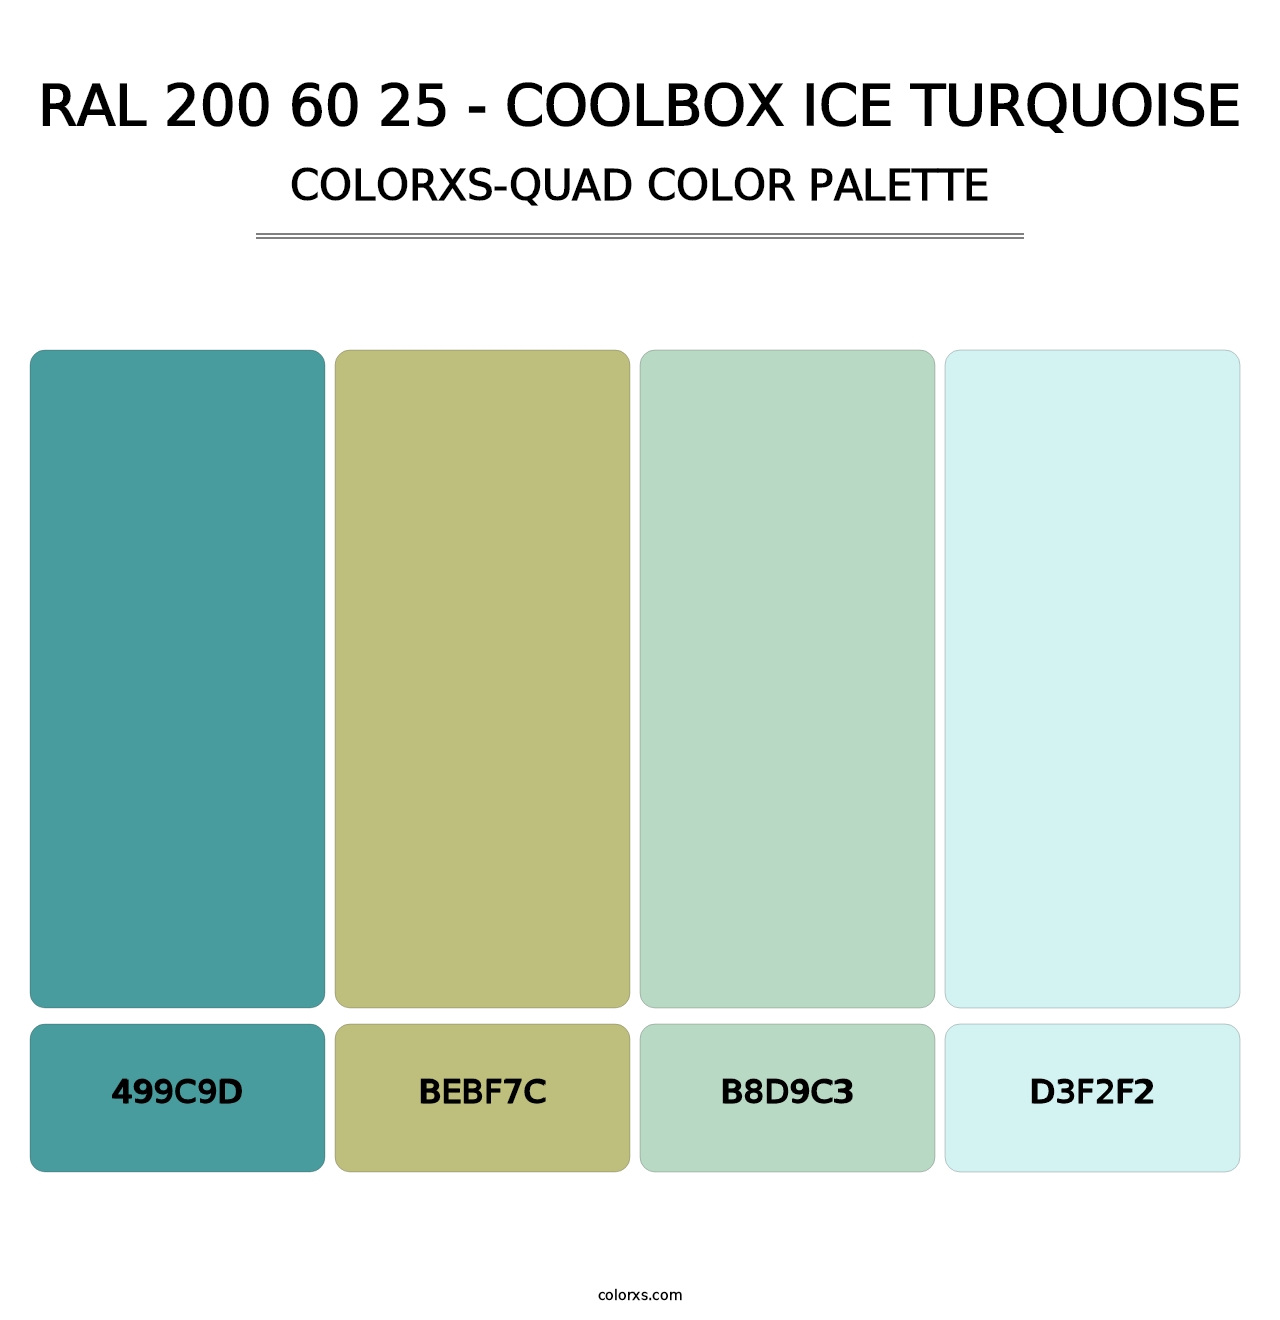 RAL 200 60 25 - Coolbox Ice Turquoise - Colorxs Quad Palette